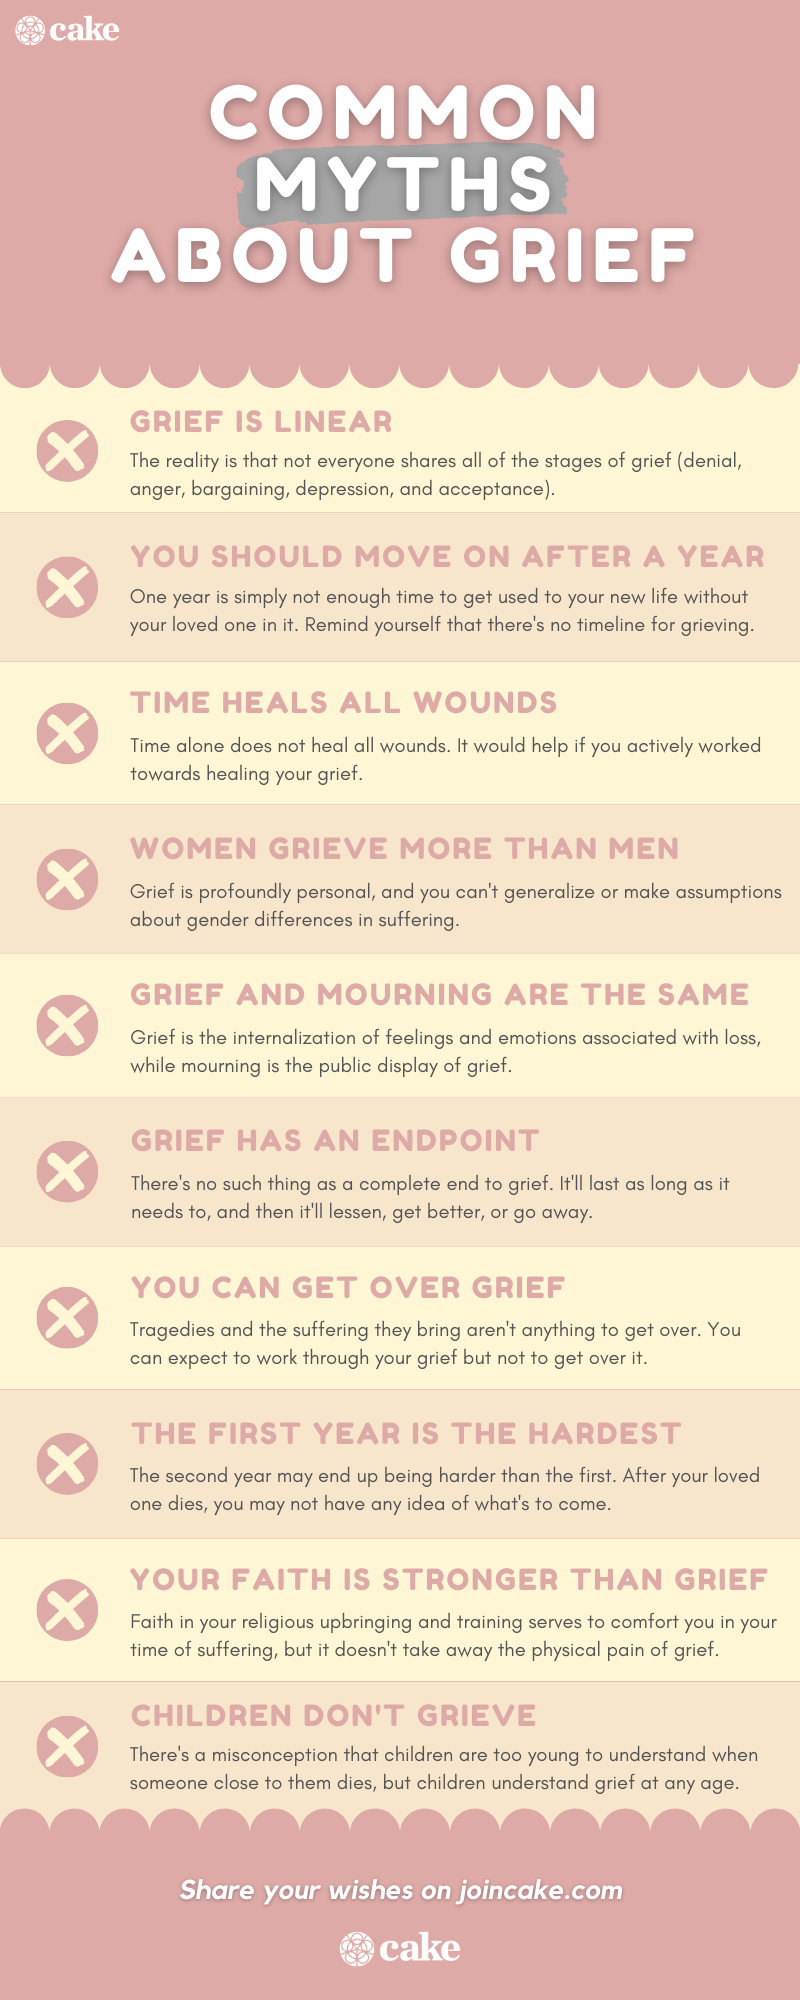 Infographic about the myths about grief